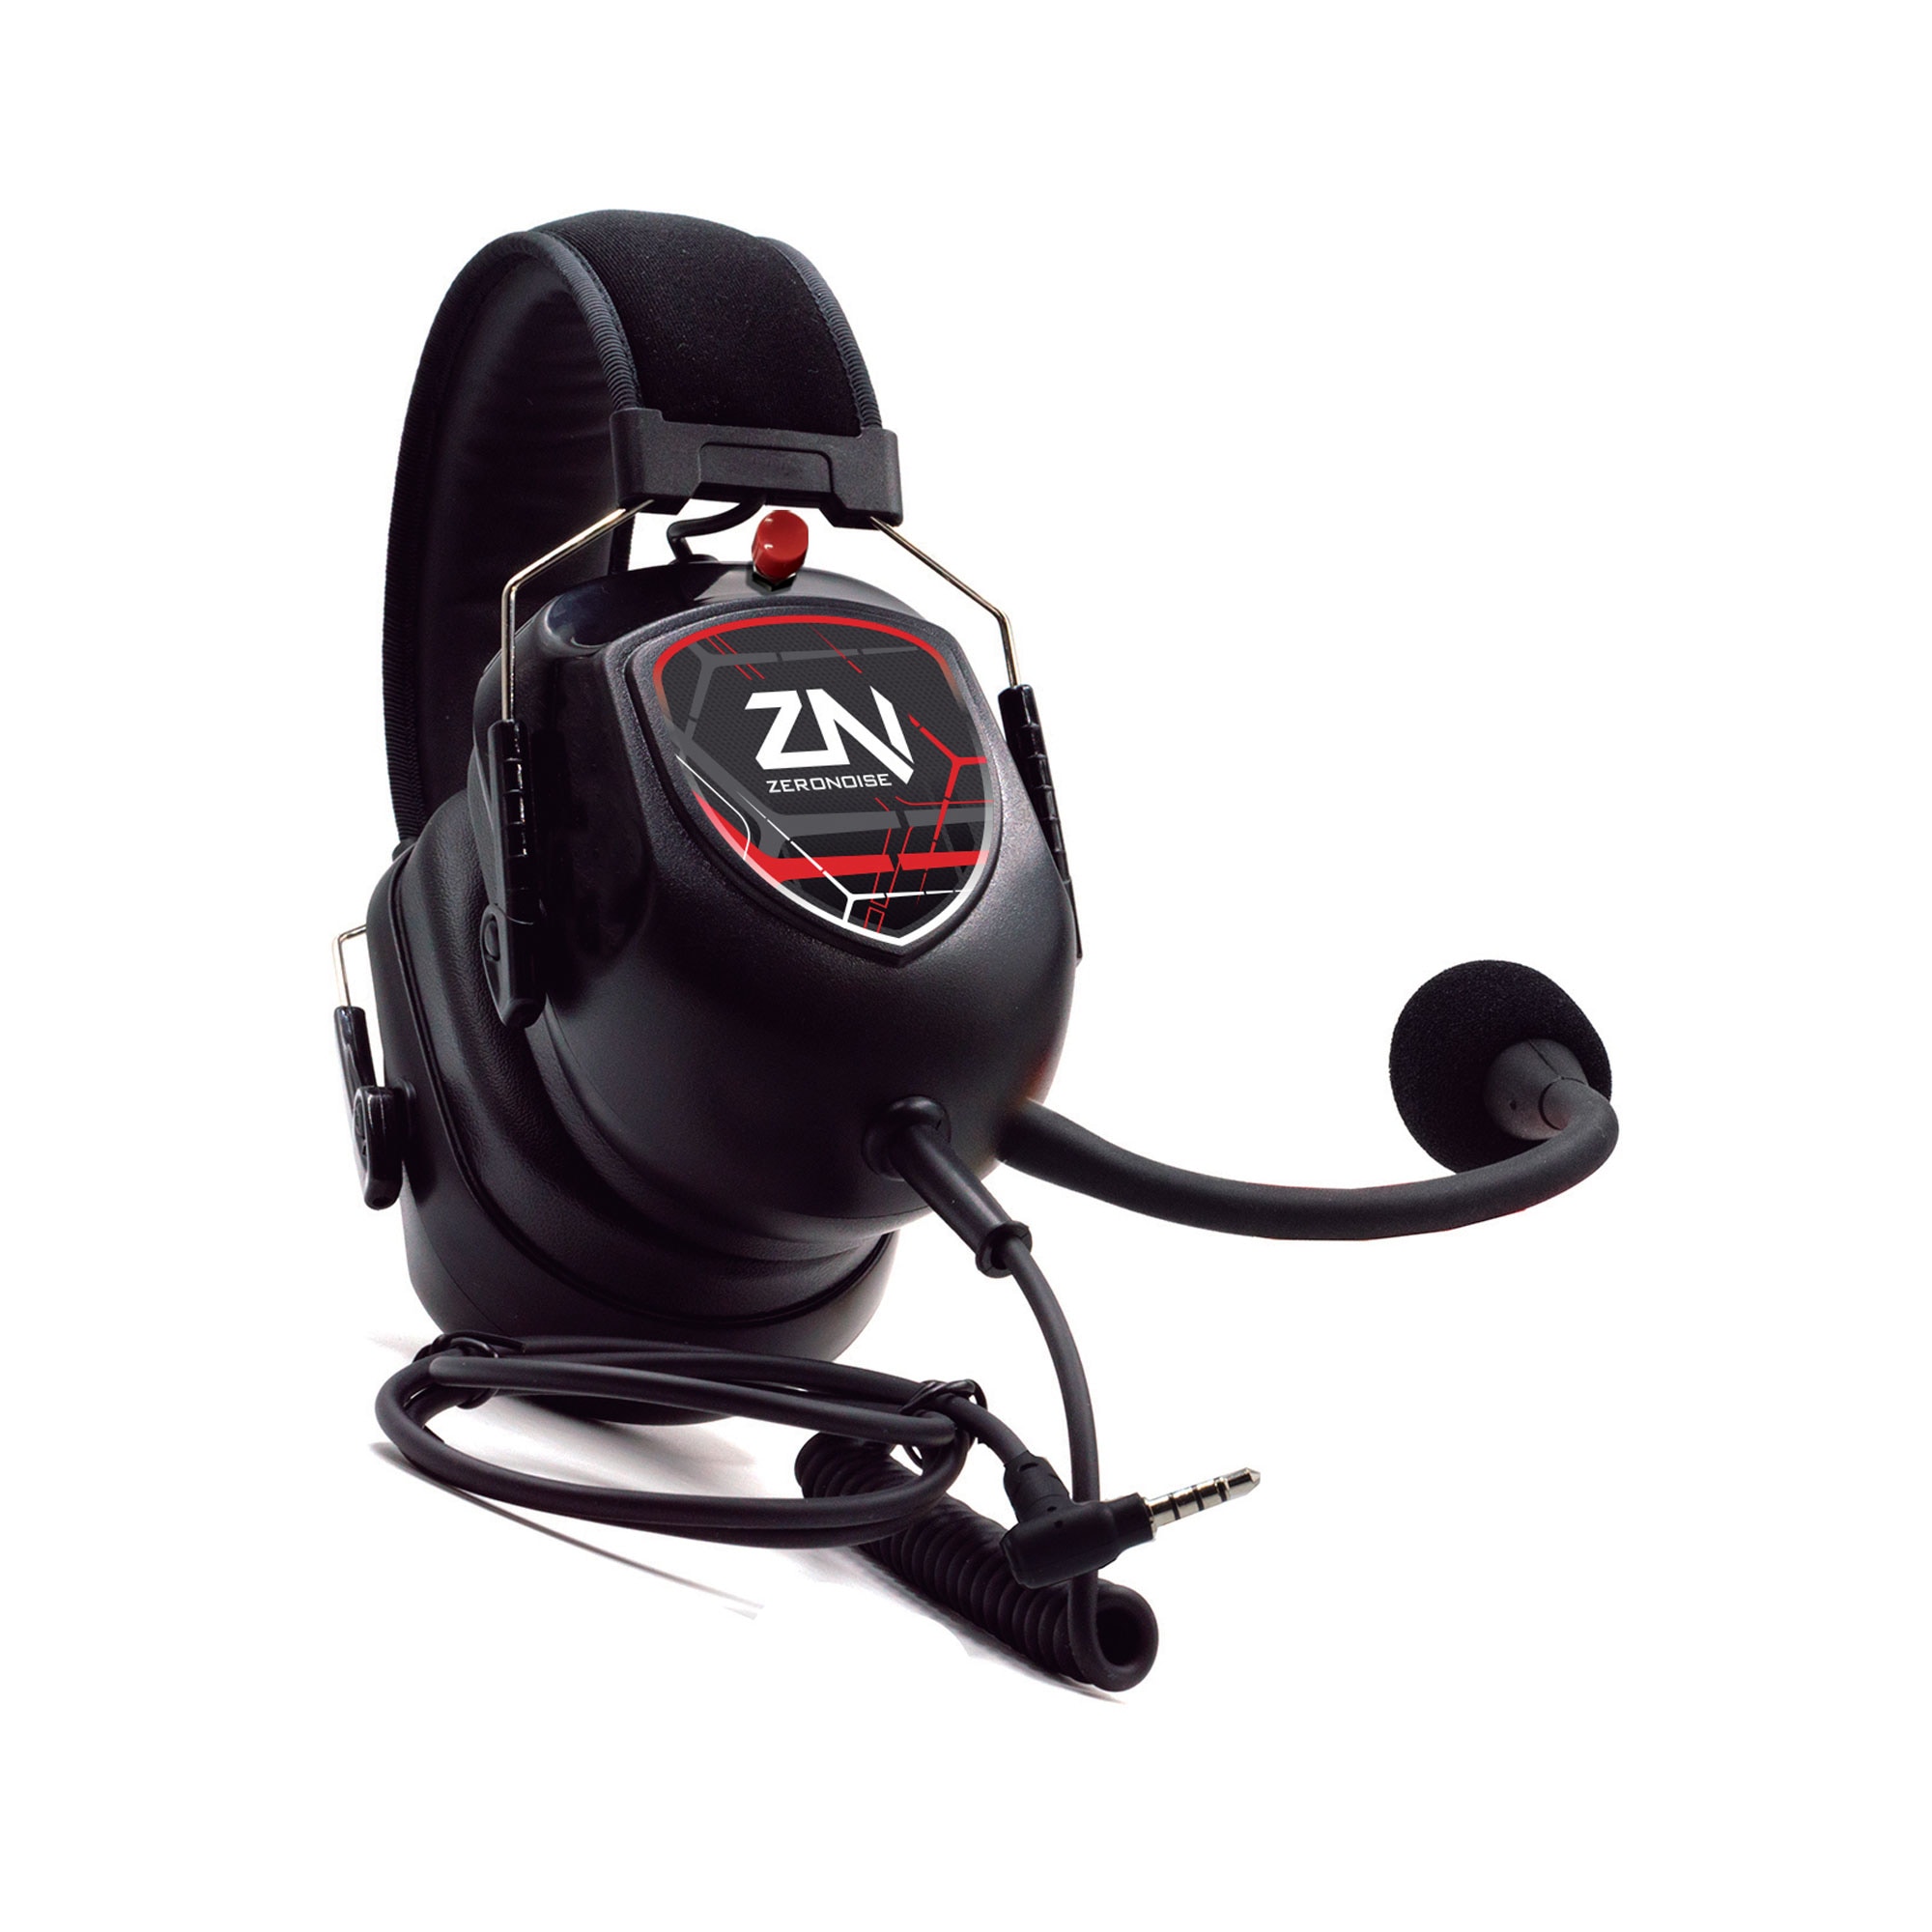 Pit Link Trainer ZN Professional Karting Interom System (IPhone)